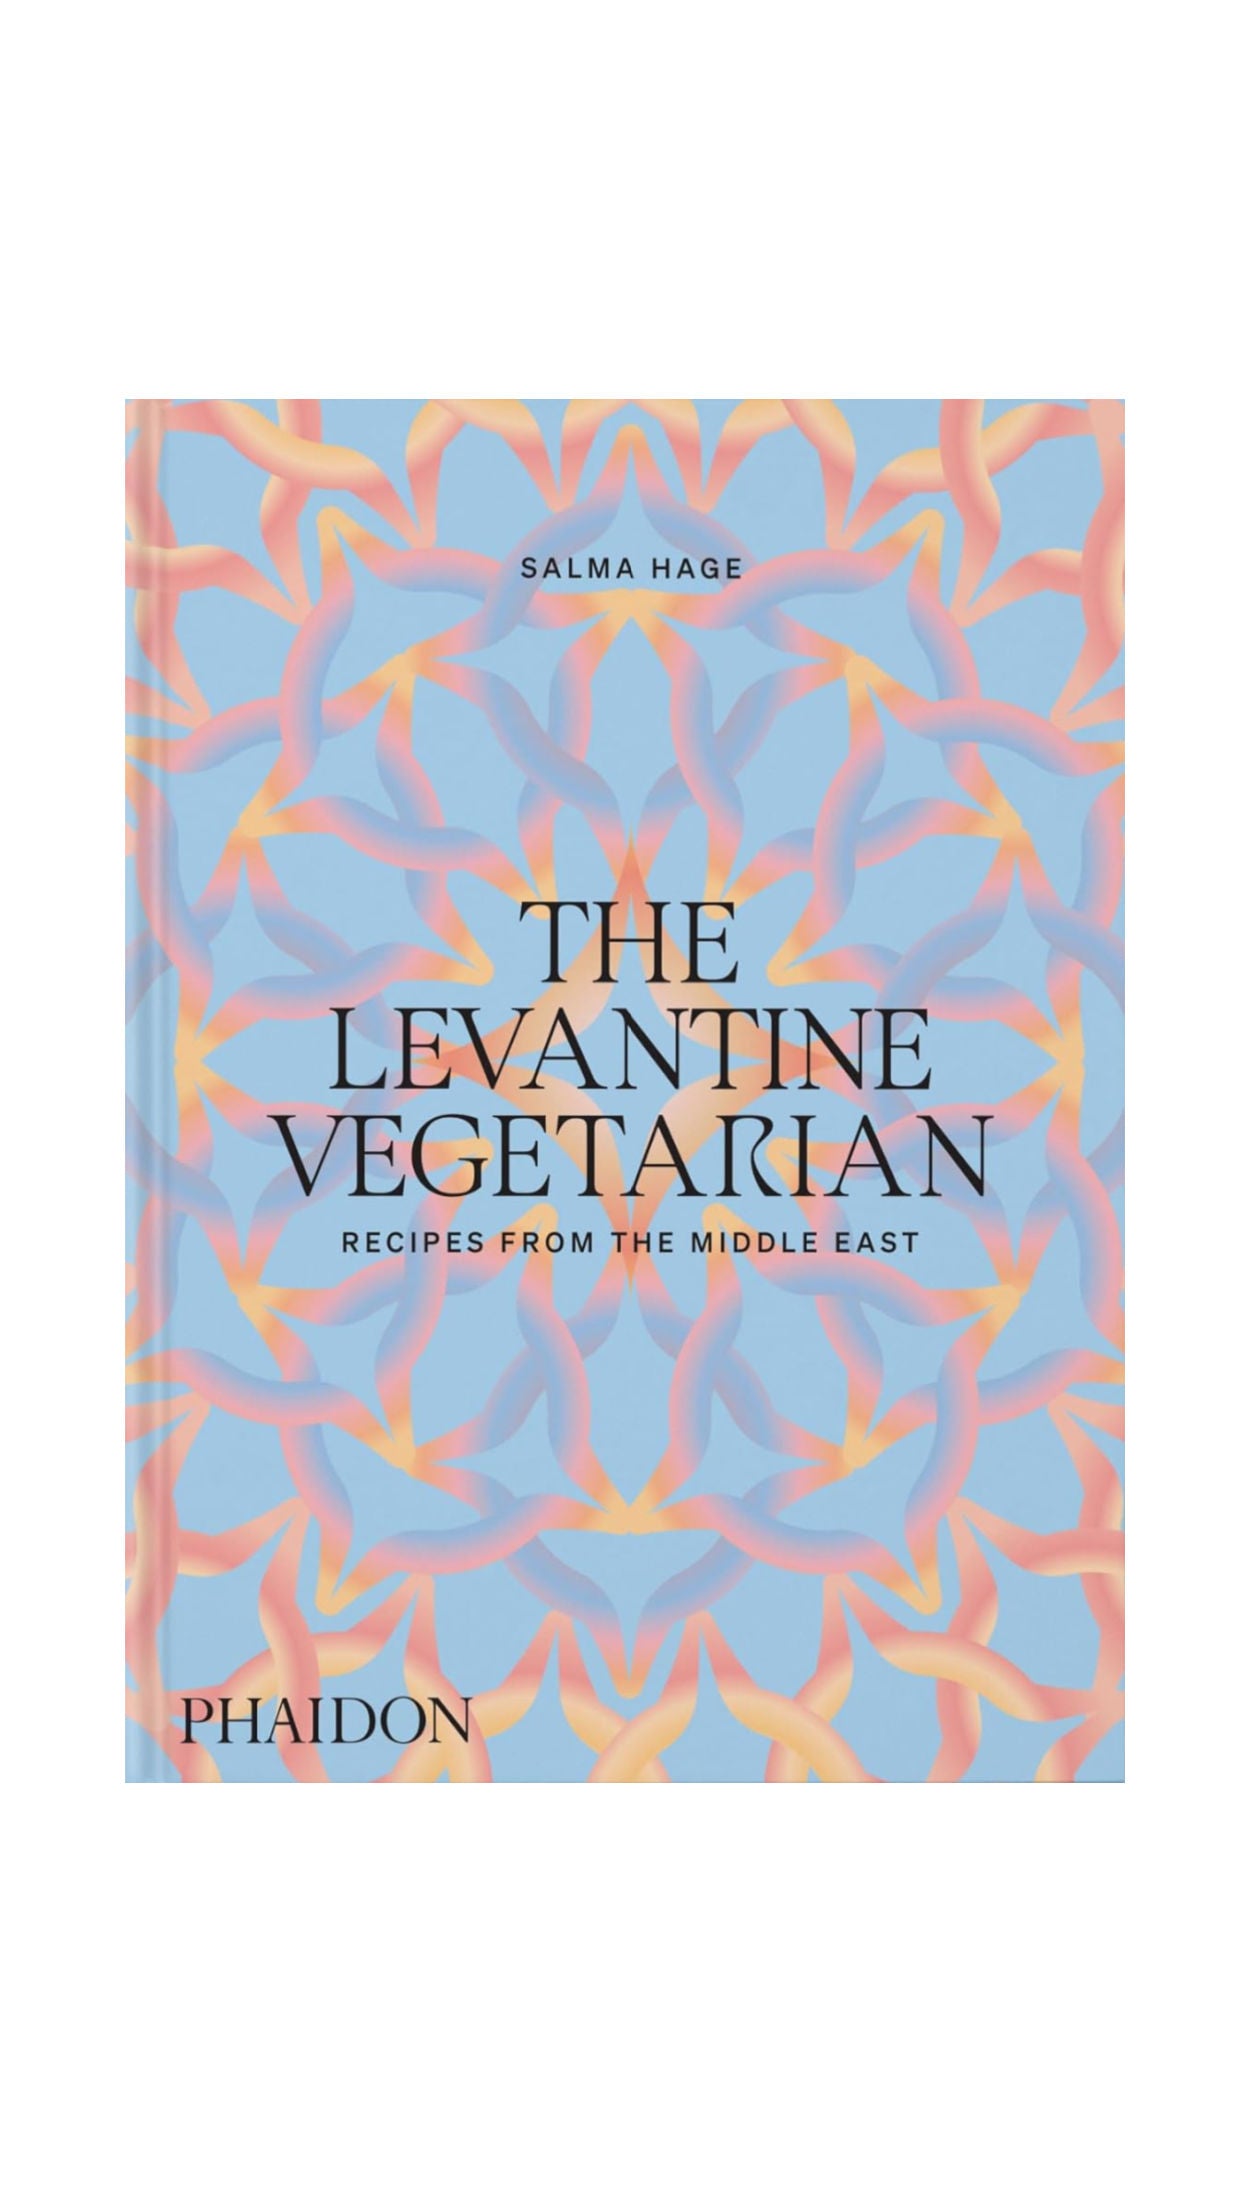 The Levantine Vegetarian / COMING MAY 8TH!